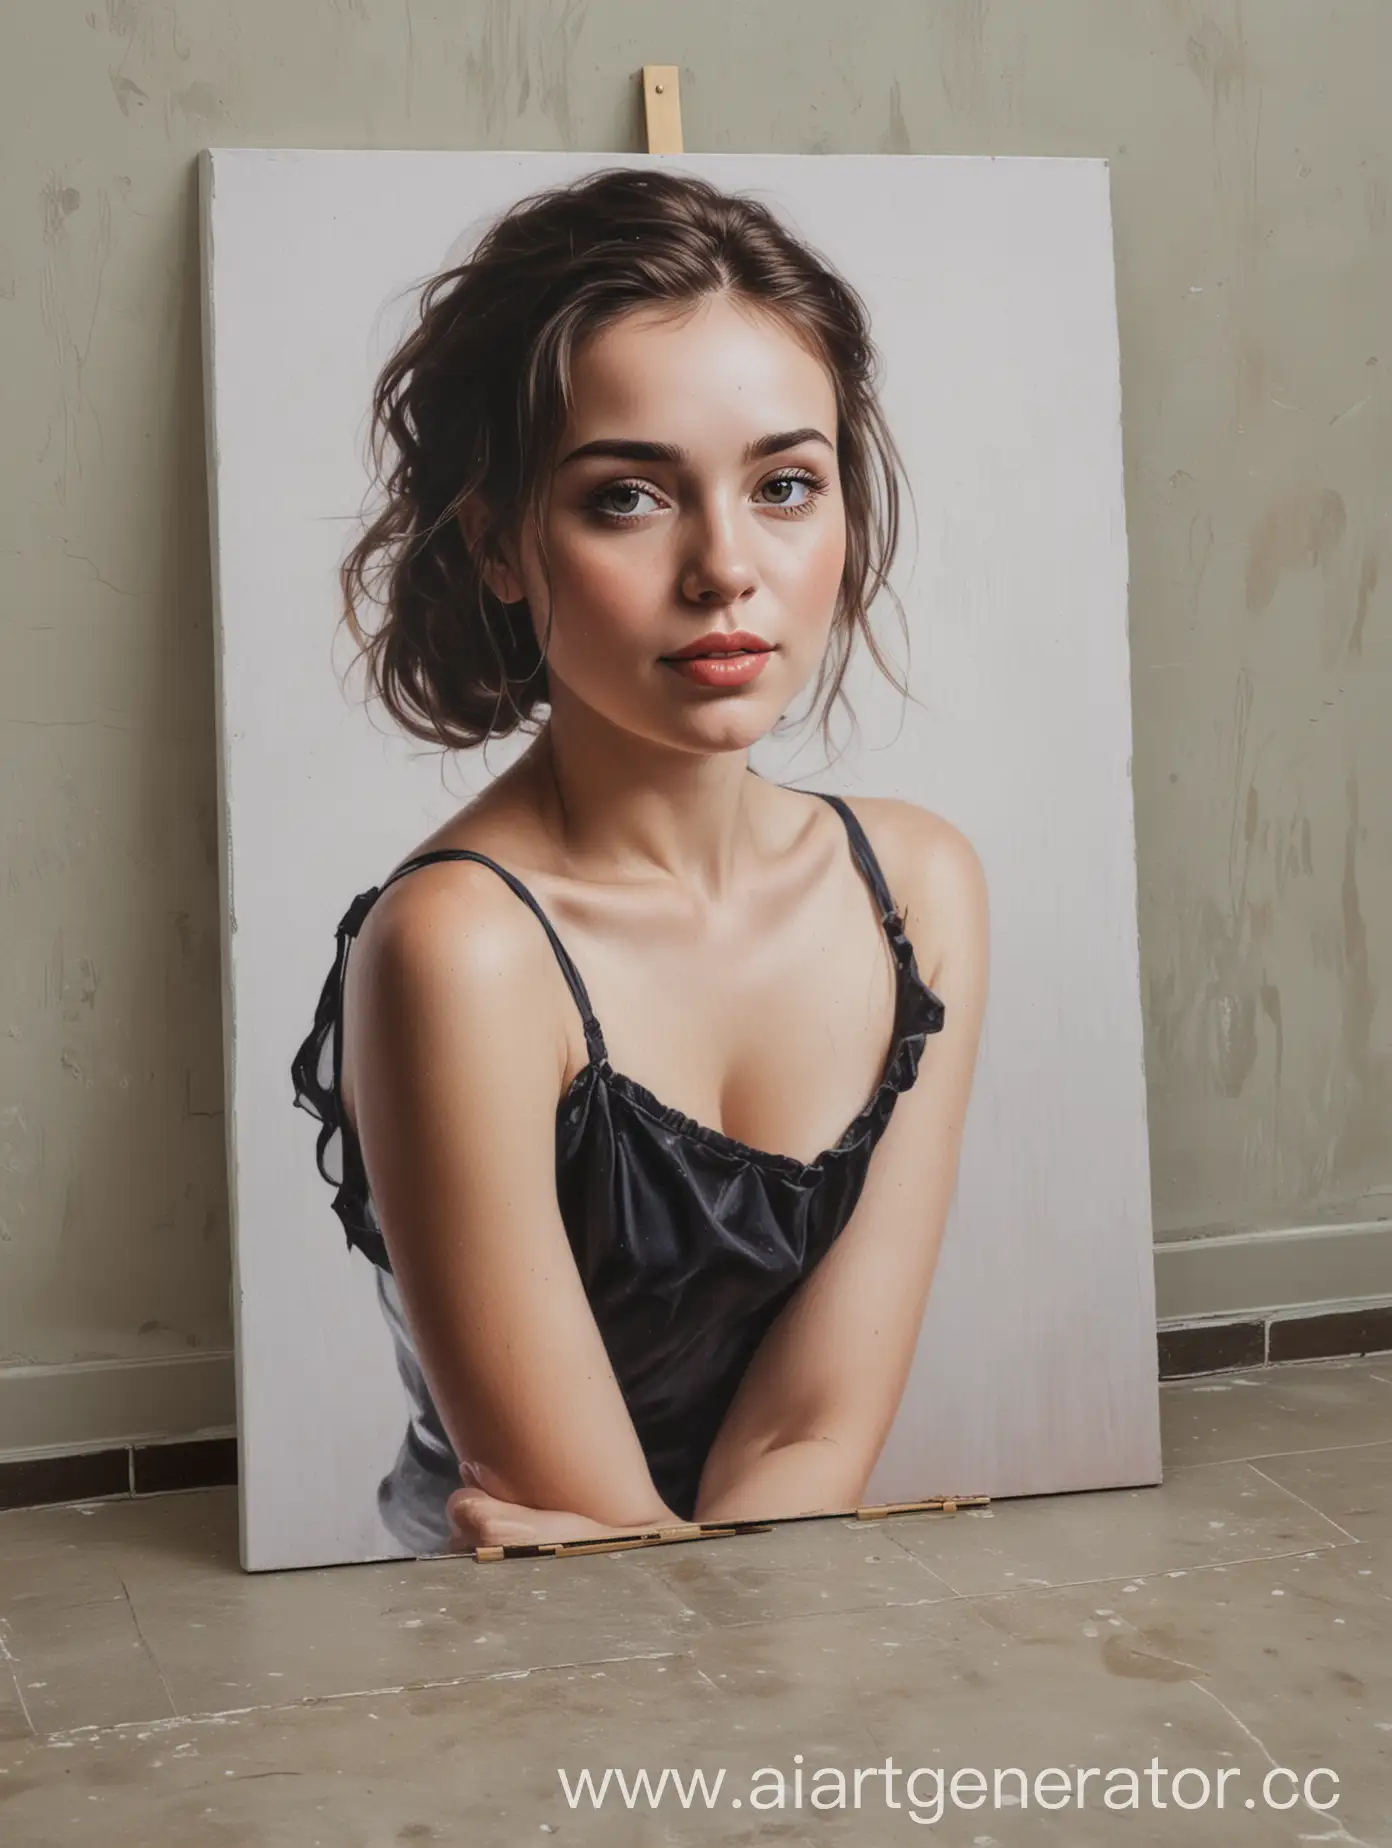 A portrait on canvas measuring 50x70 cm stands on the floor